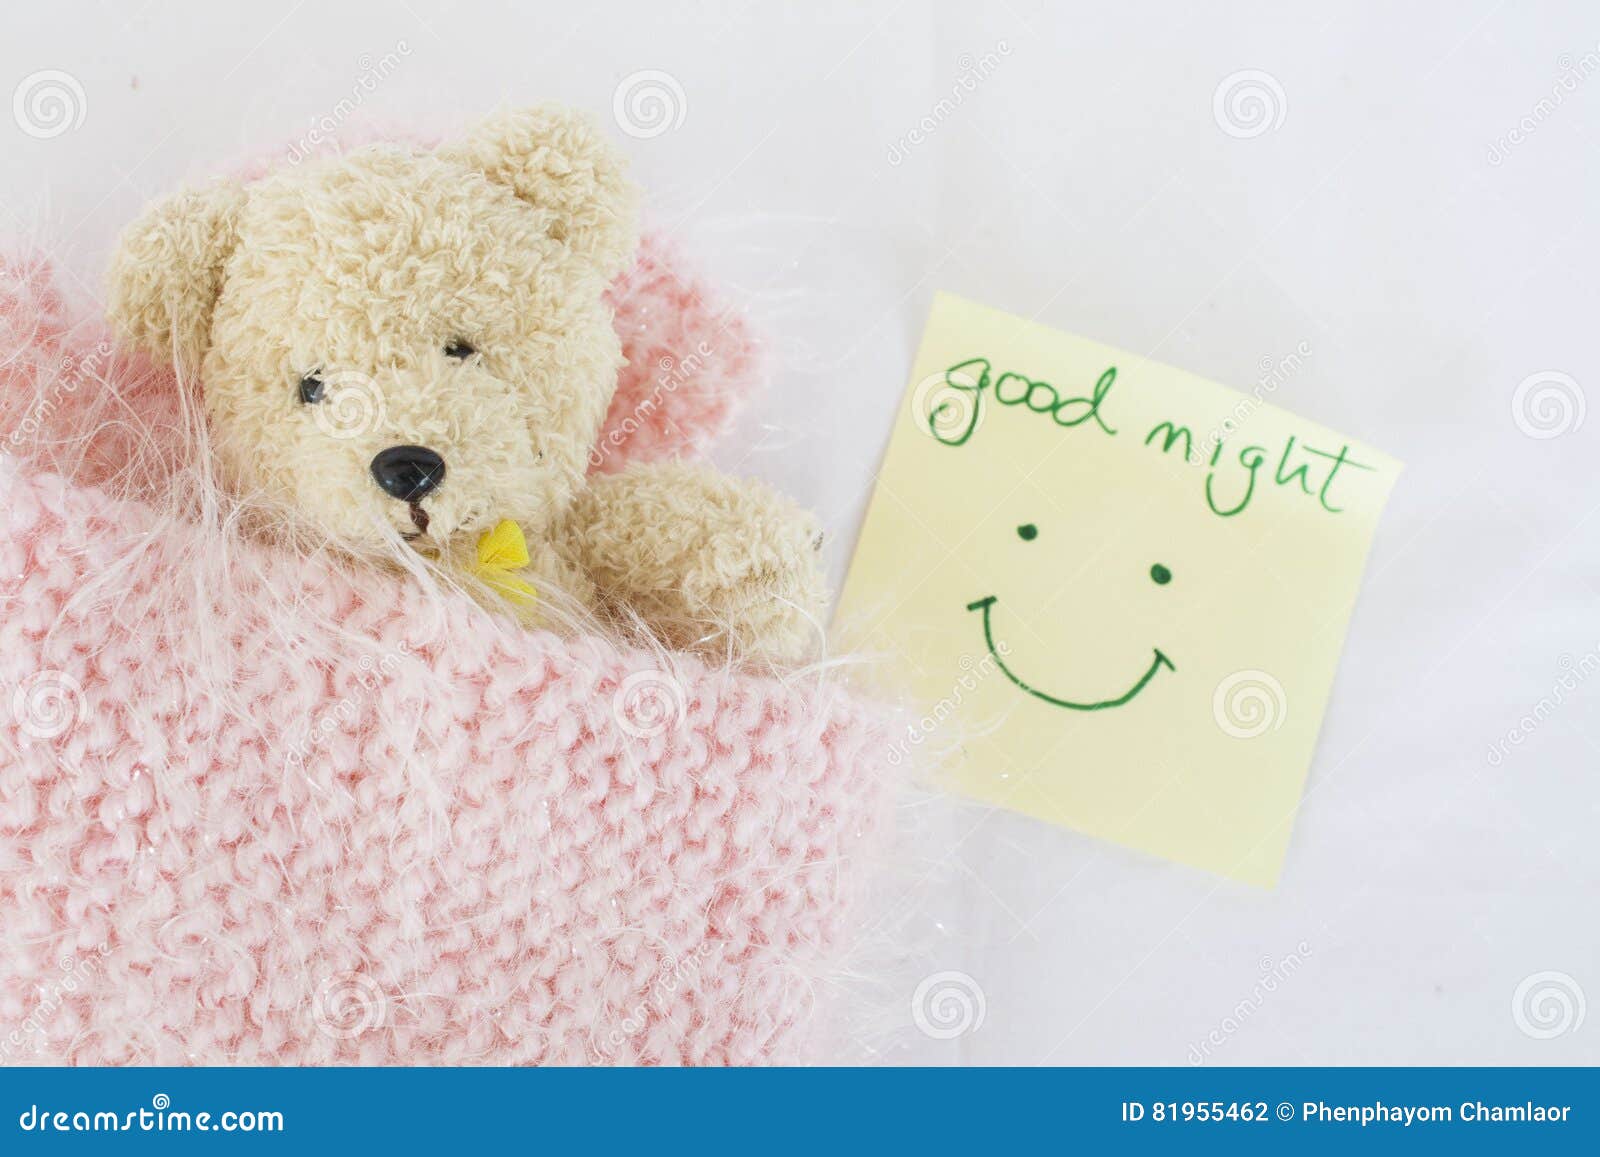 Messages Card and Teddy Bear Stock Photo - Image of message, baby ...